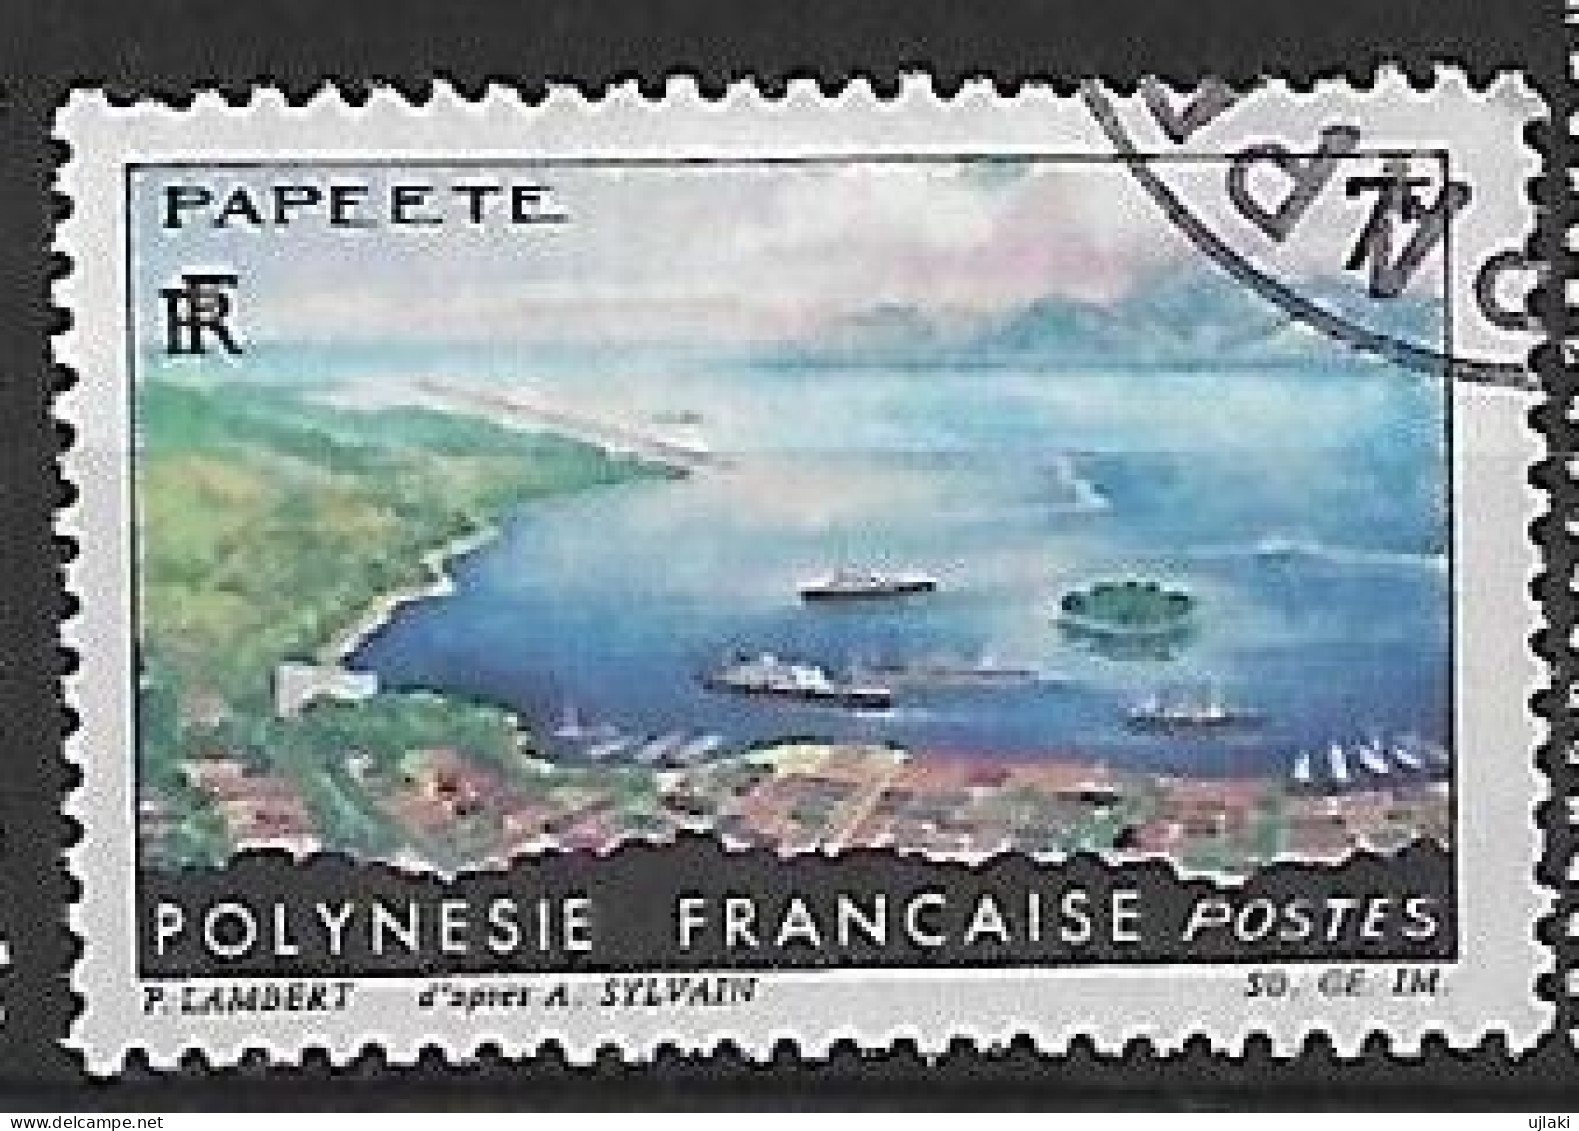 POLYNESIE FRANCAISE: Paysages:Papeete  N°32  Année:1964. - Used Stamps